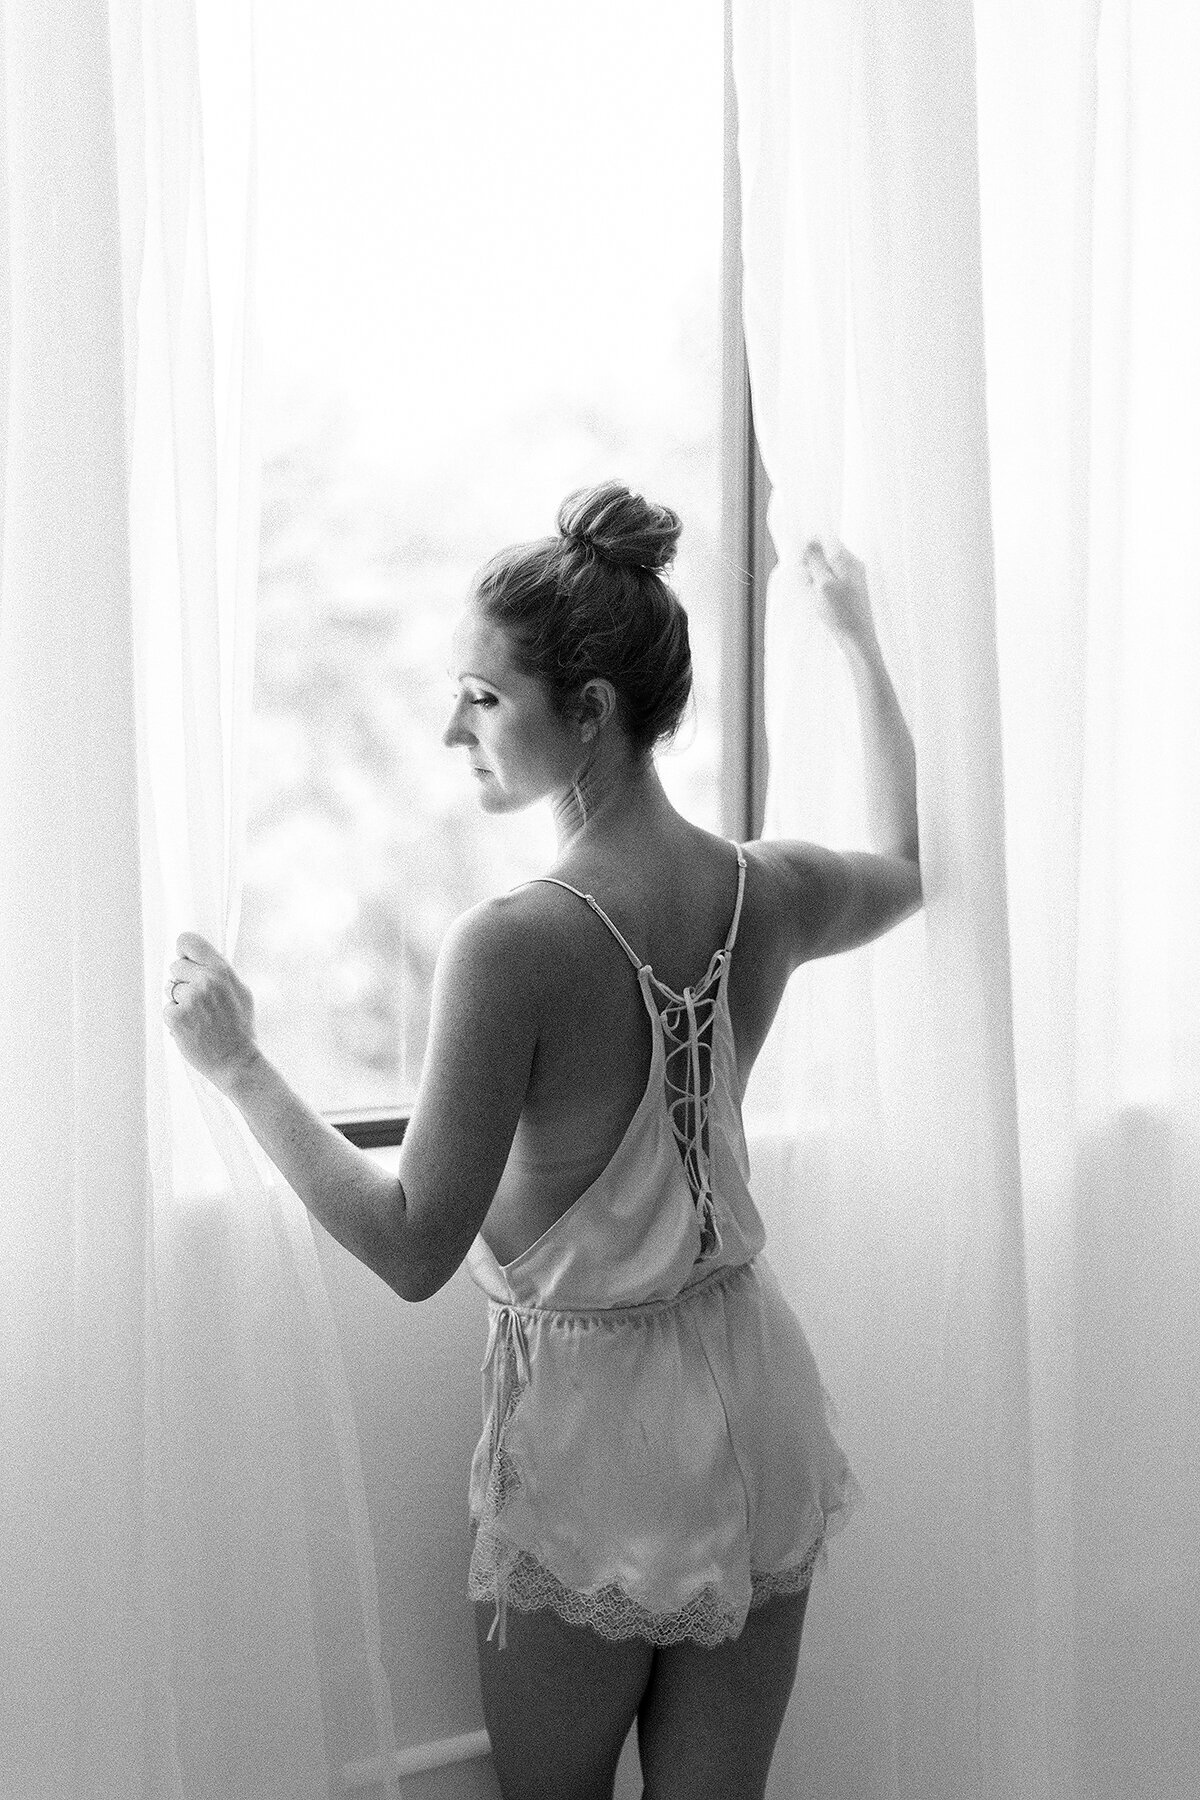 Black and white in studio boudoir photo of a woman dressed in a lace romper while she holds sheer drapes while standing by the window.